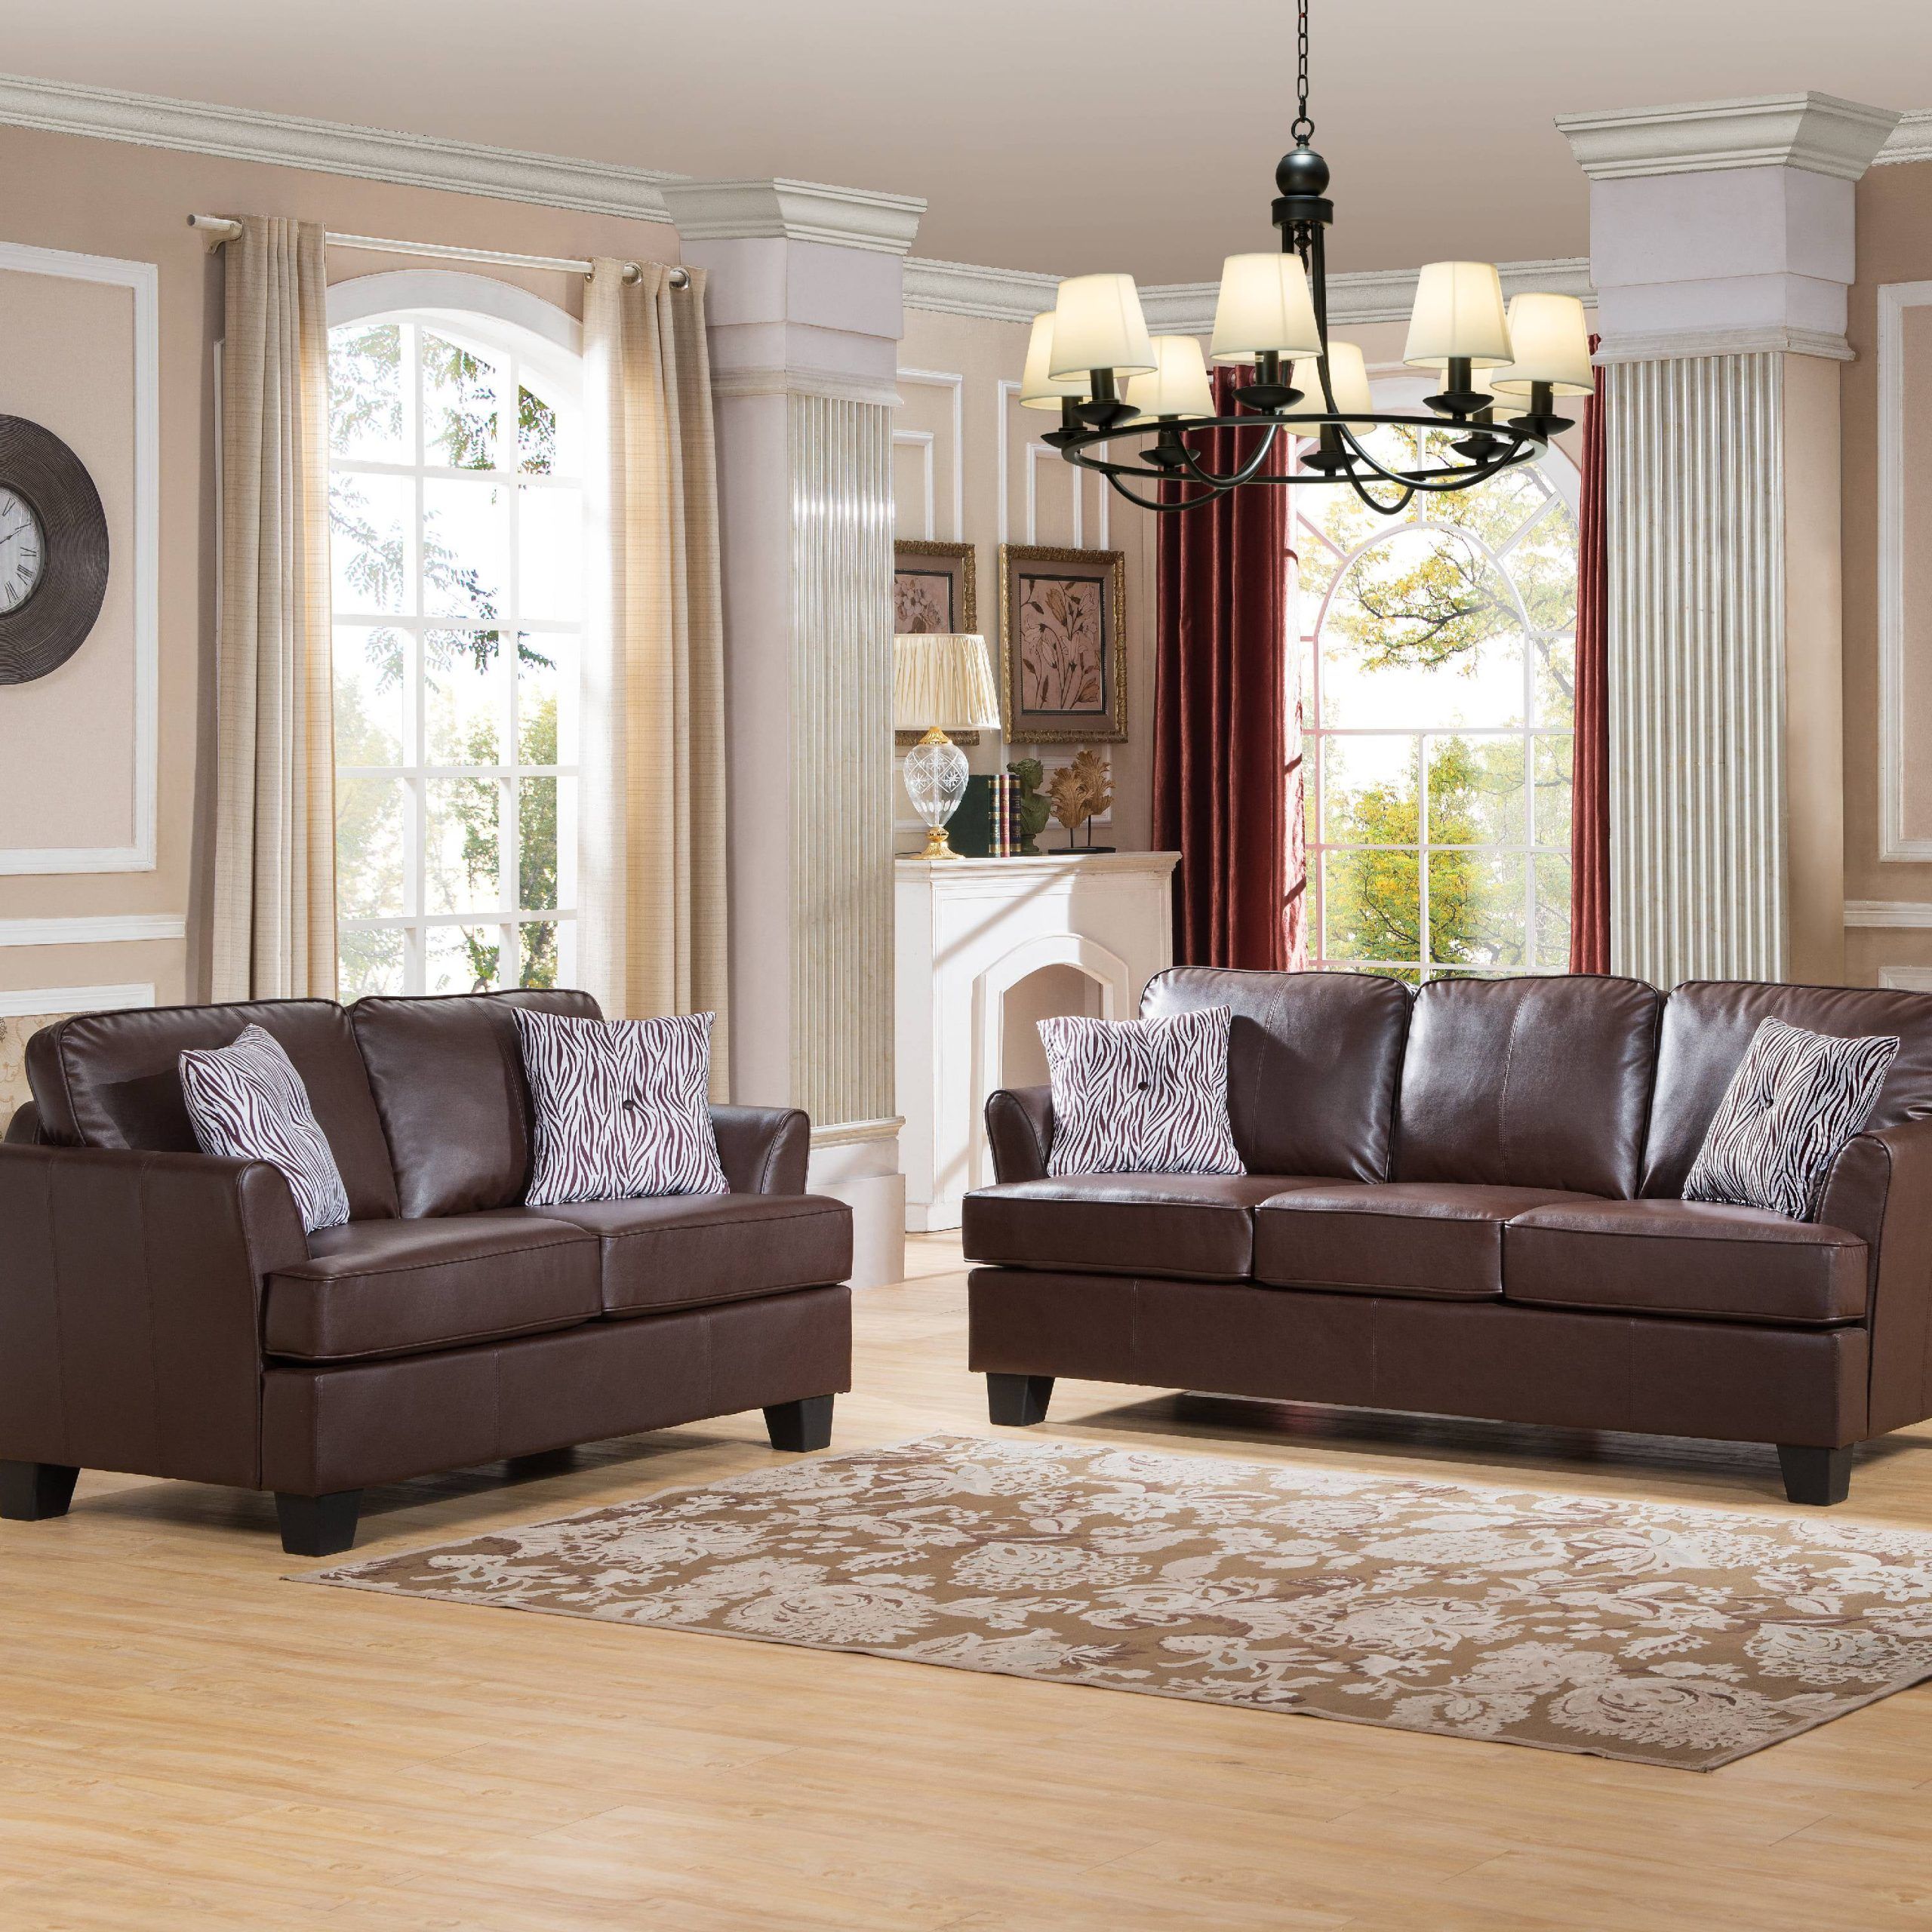 20+ Living Room Sofas Pertaining To Sofas For Living Rooms (View 8 of 20)